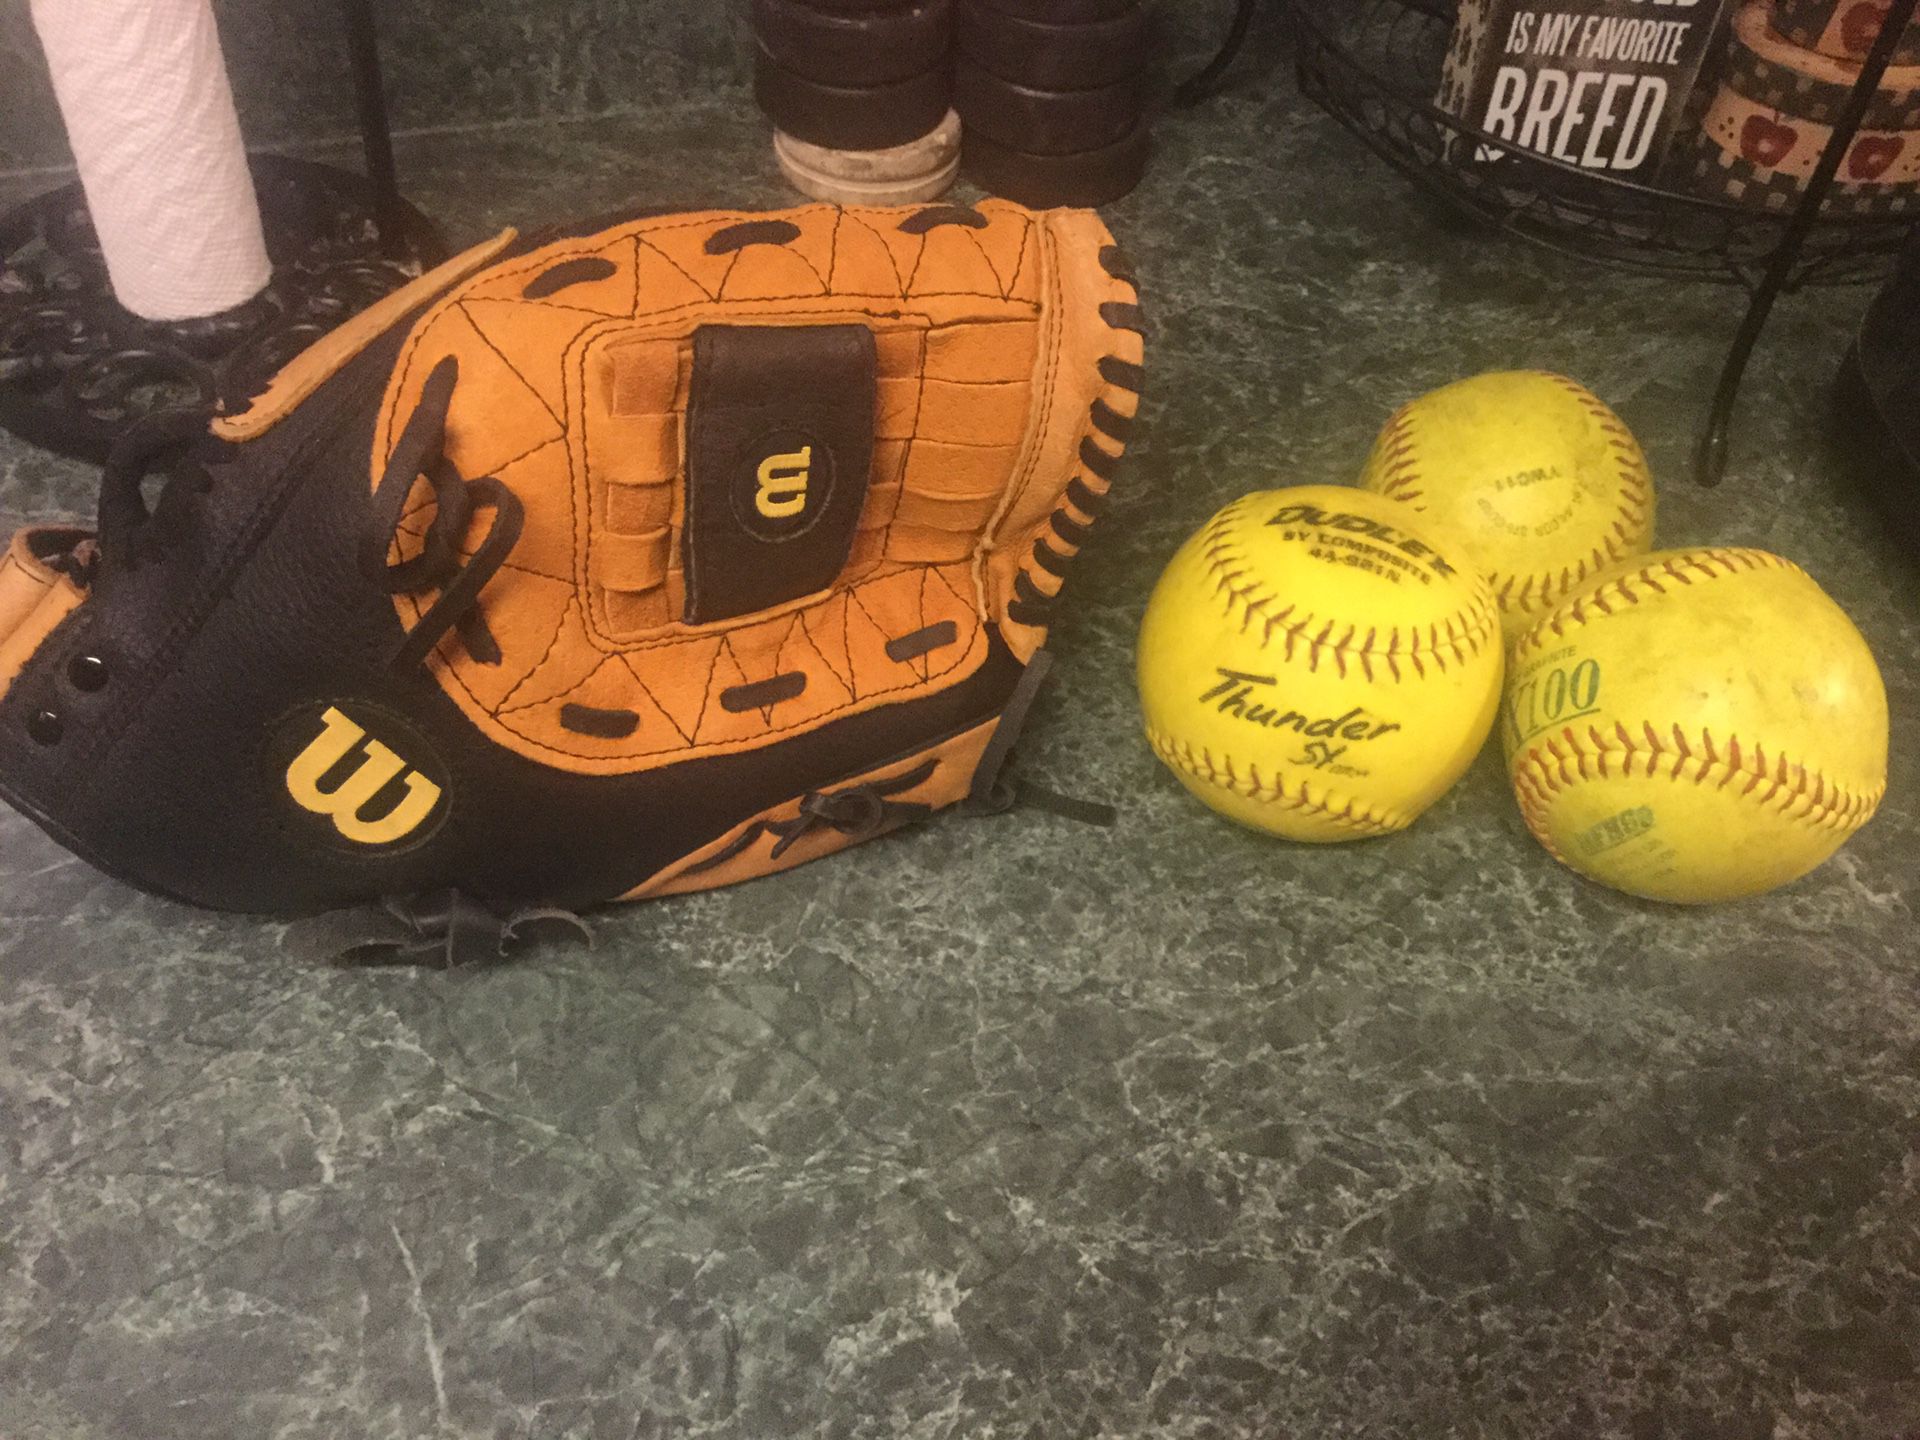 Wilson A2581 model softball glove 13” like new with over size pocket. Comes with 3 softballs